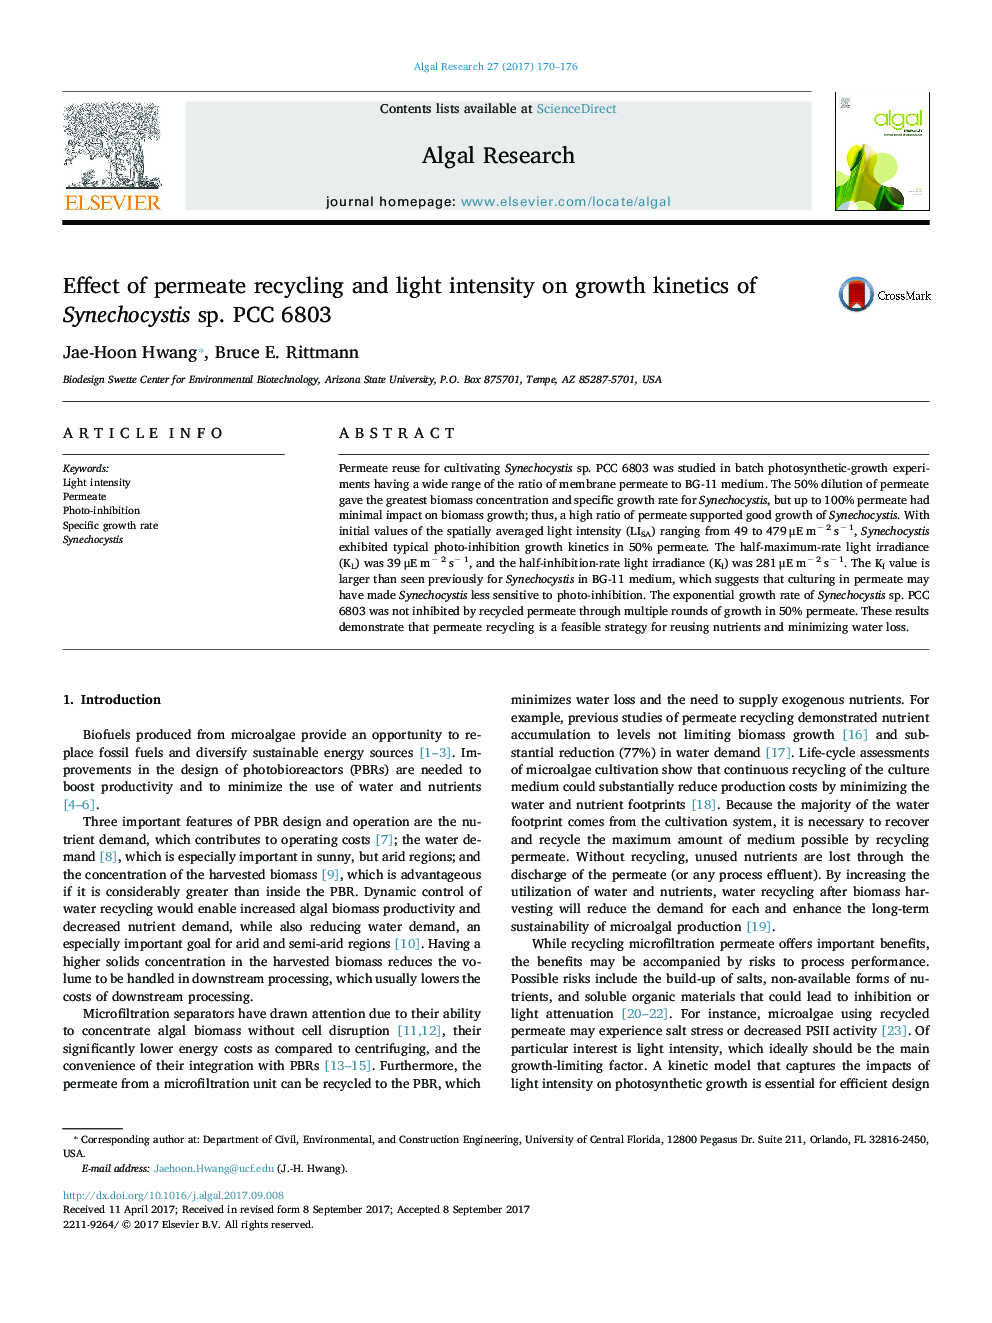 Effect of permeate recycling and light intensity on growth kinetics of Synechocystis sp. PCC 6803